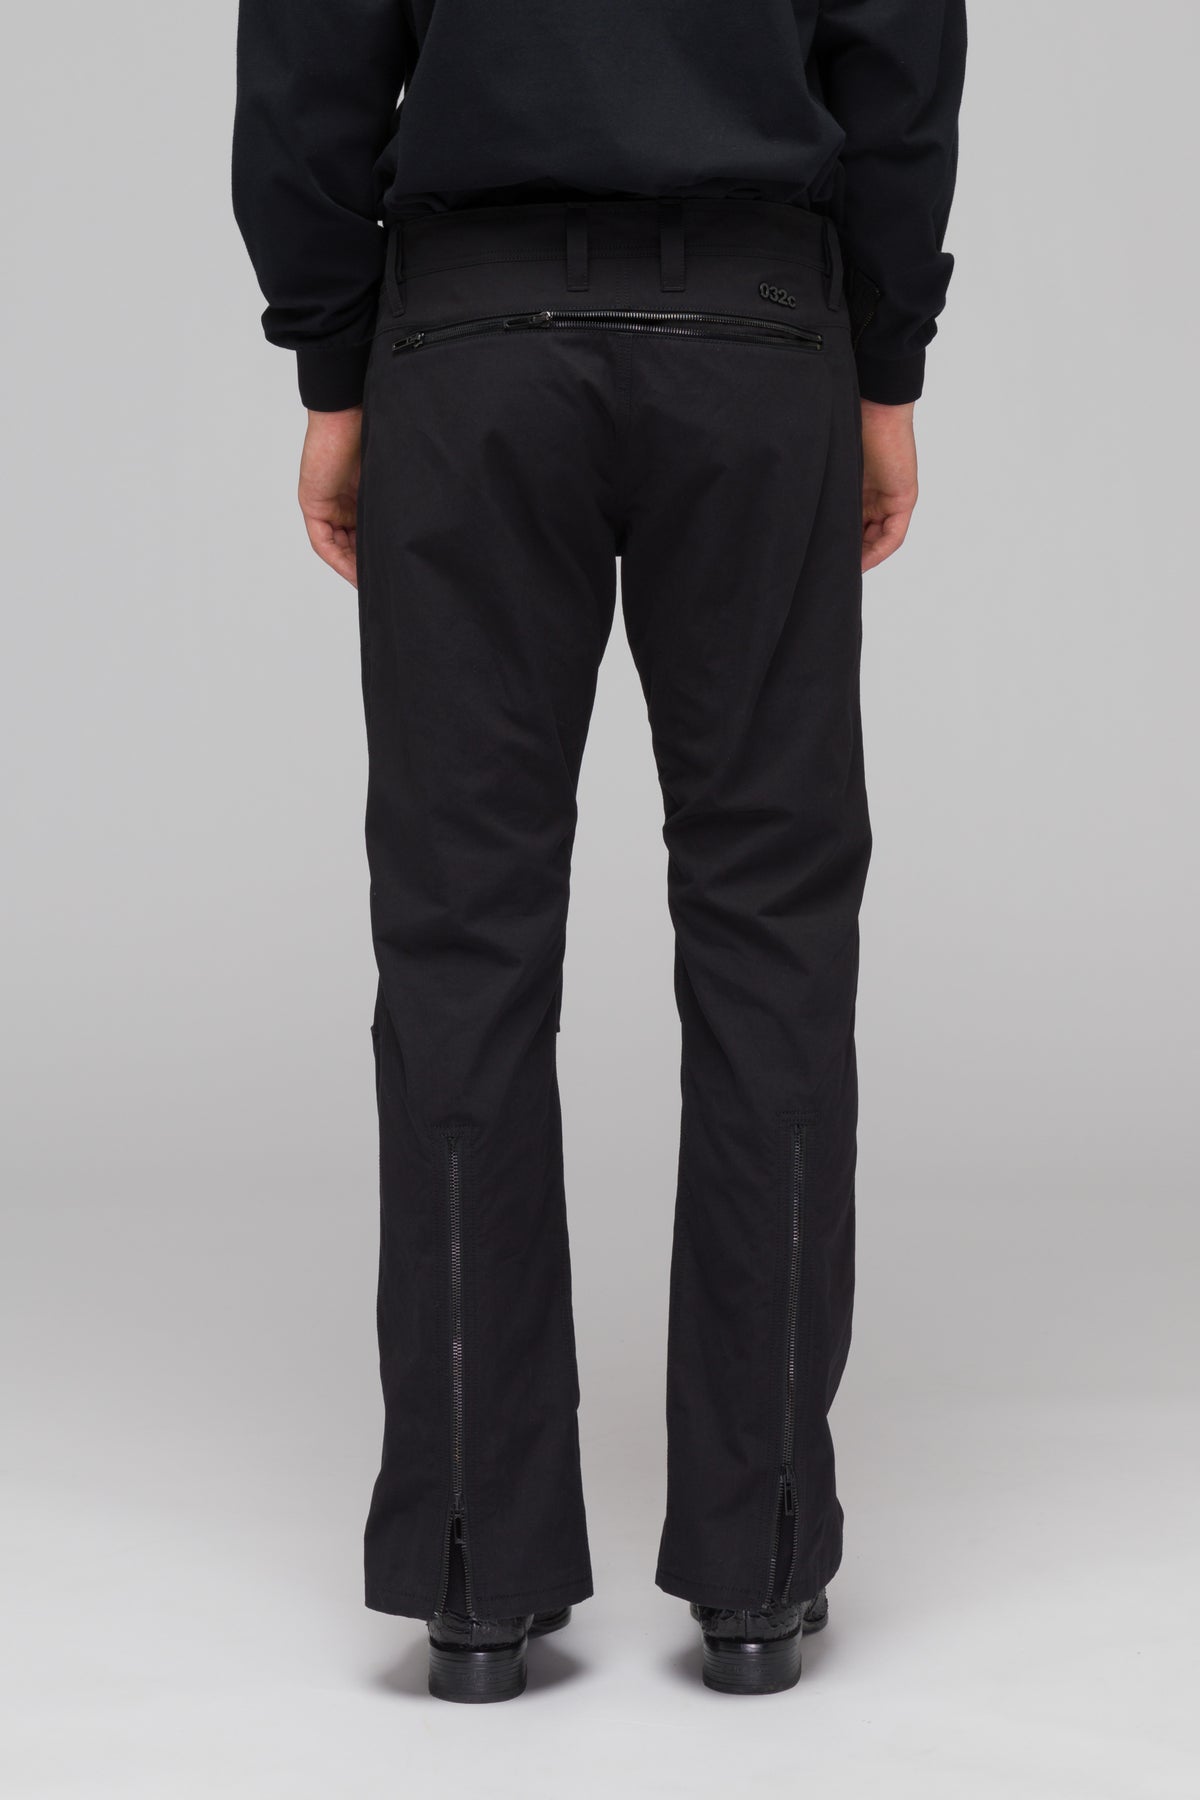 Men's zip-off stretch trousers with Cargo Pockets